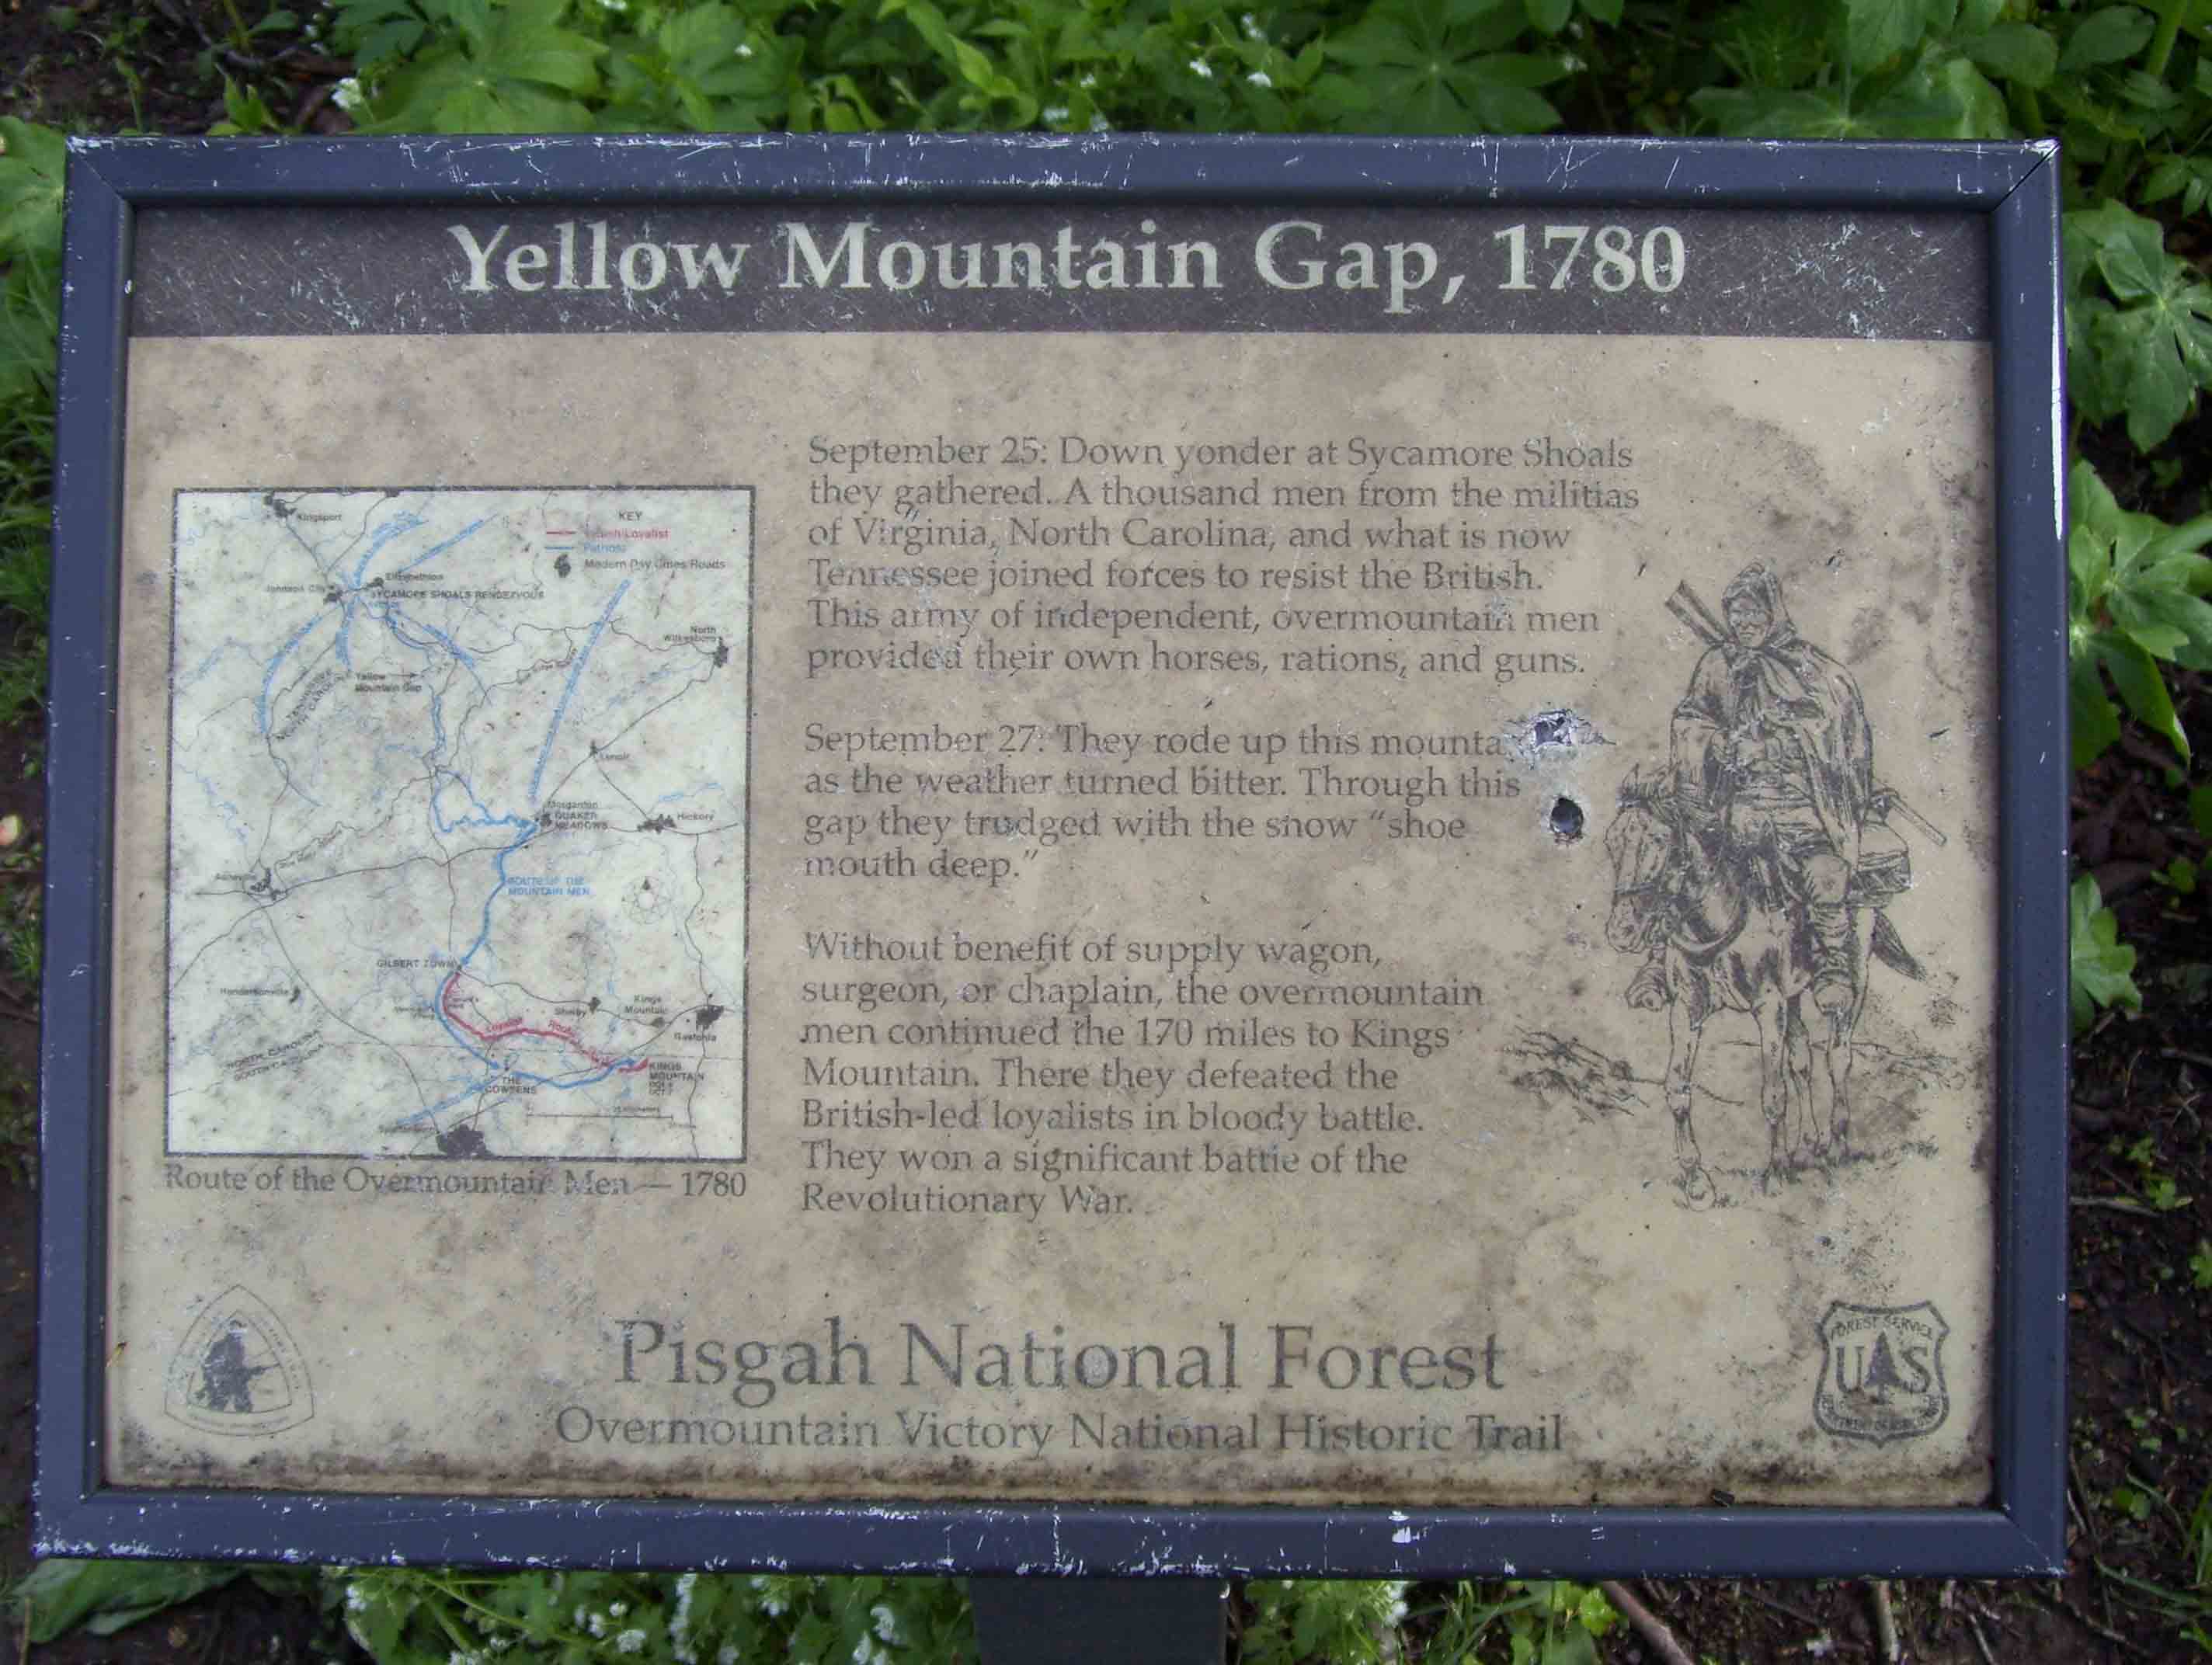 MM 9.2  Historical Marker at Yellow Mountain Gap.  Courtesy dlcul@conncoll.edu